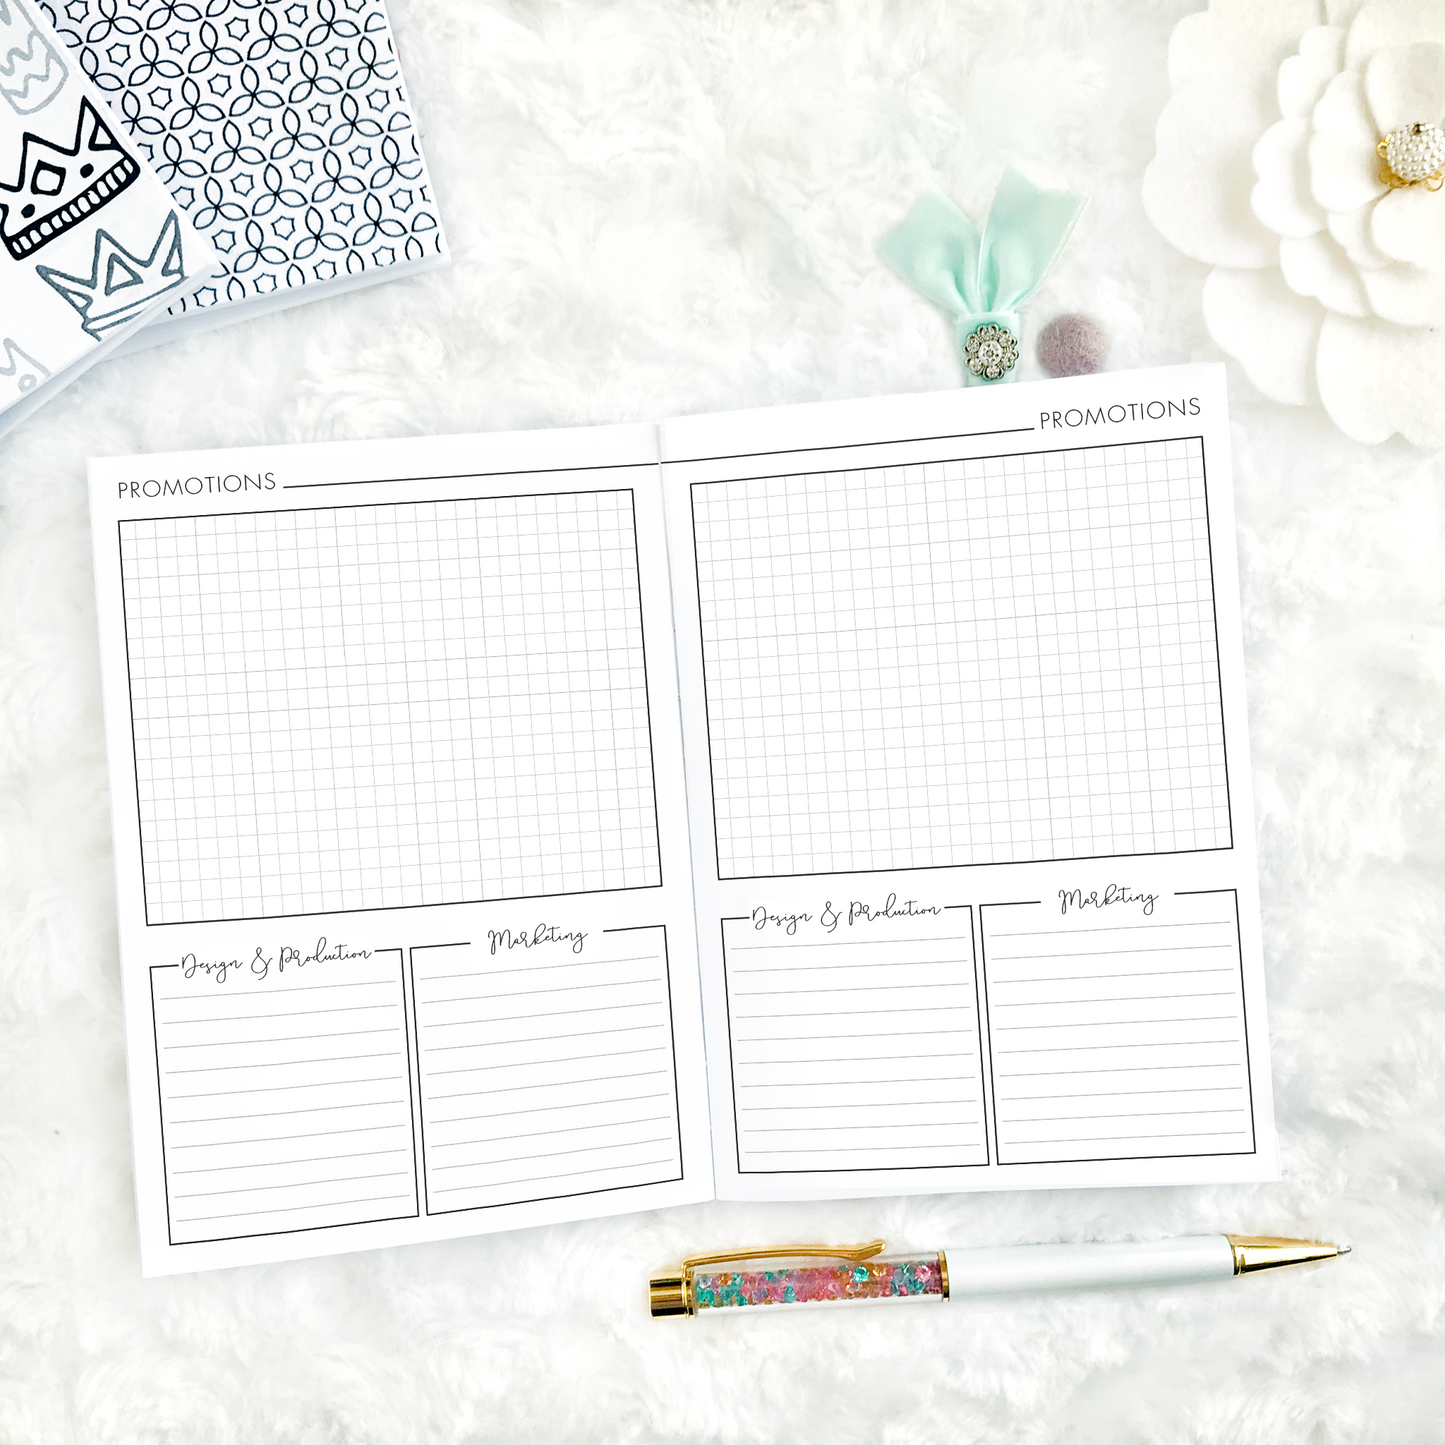 Executive - Promotions Planner | Printable